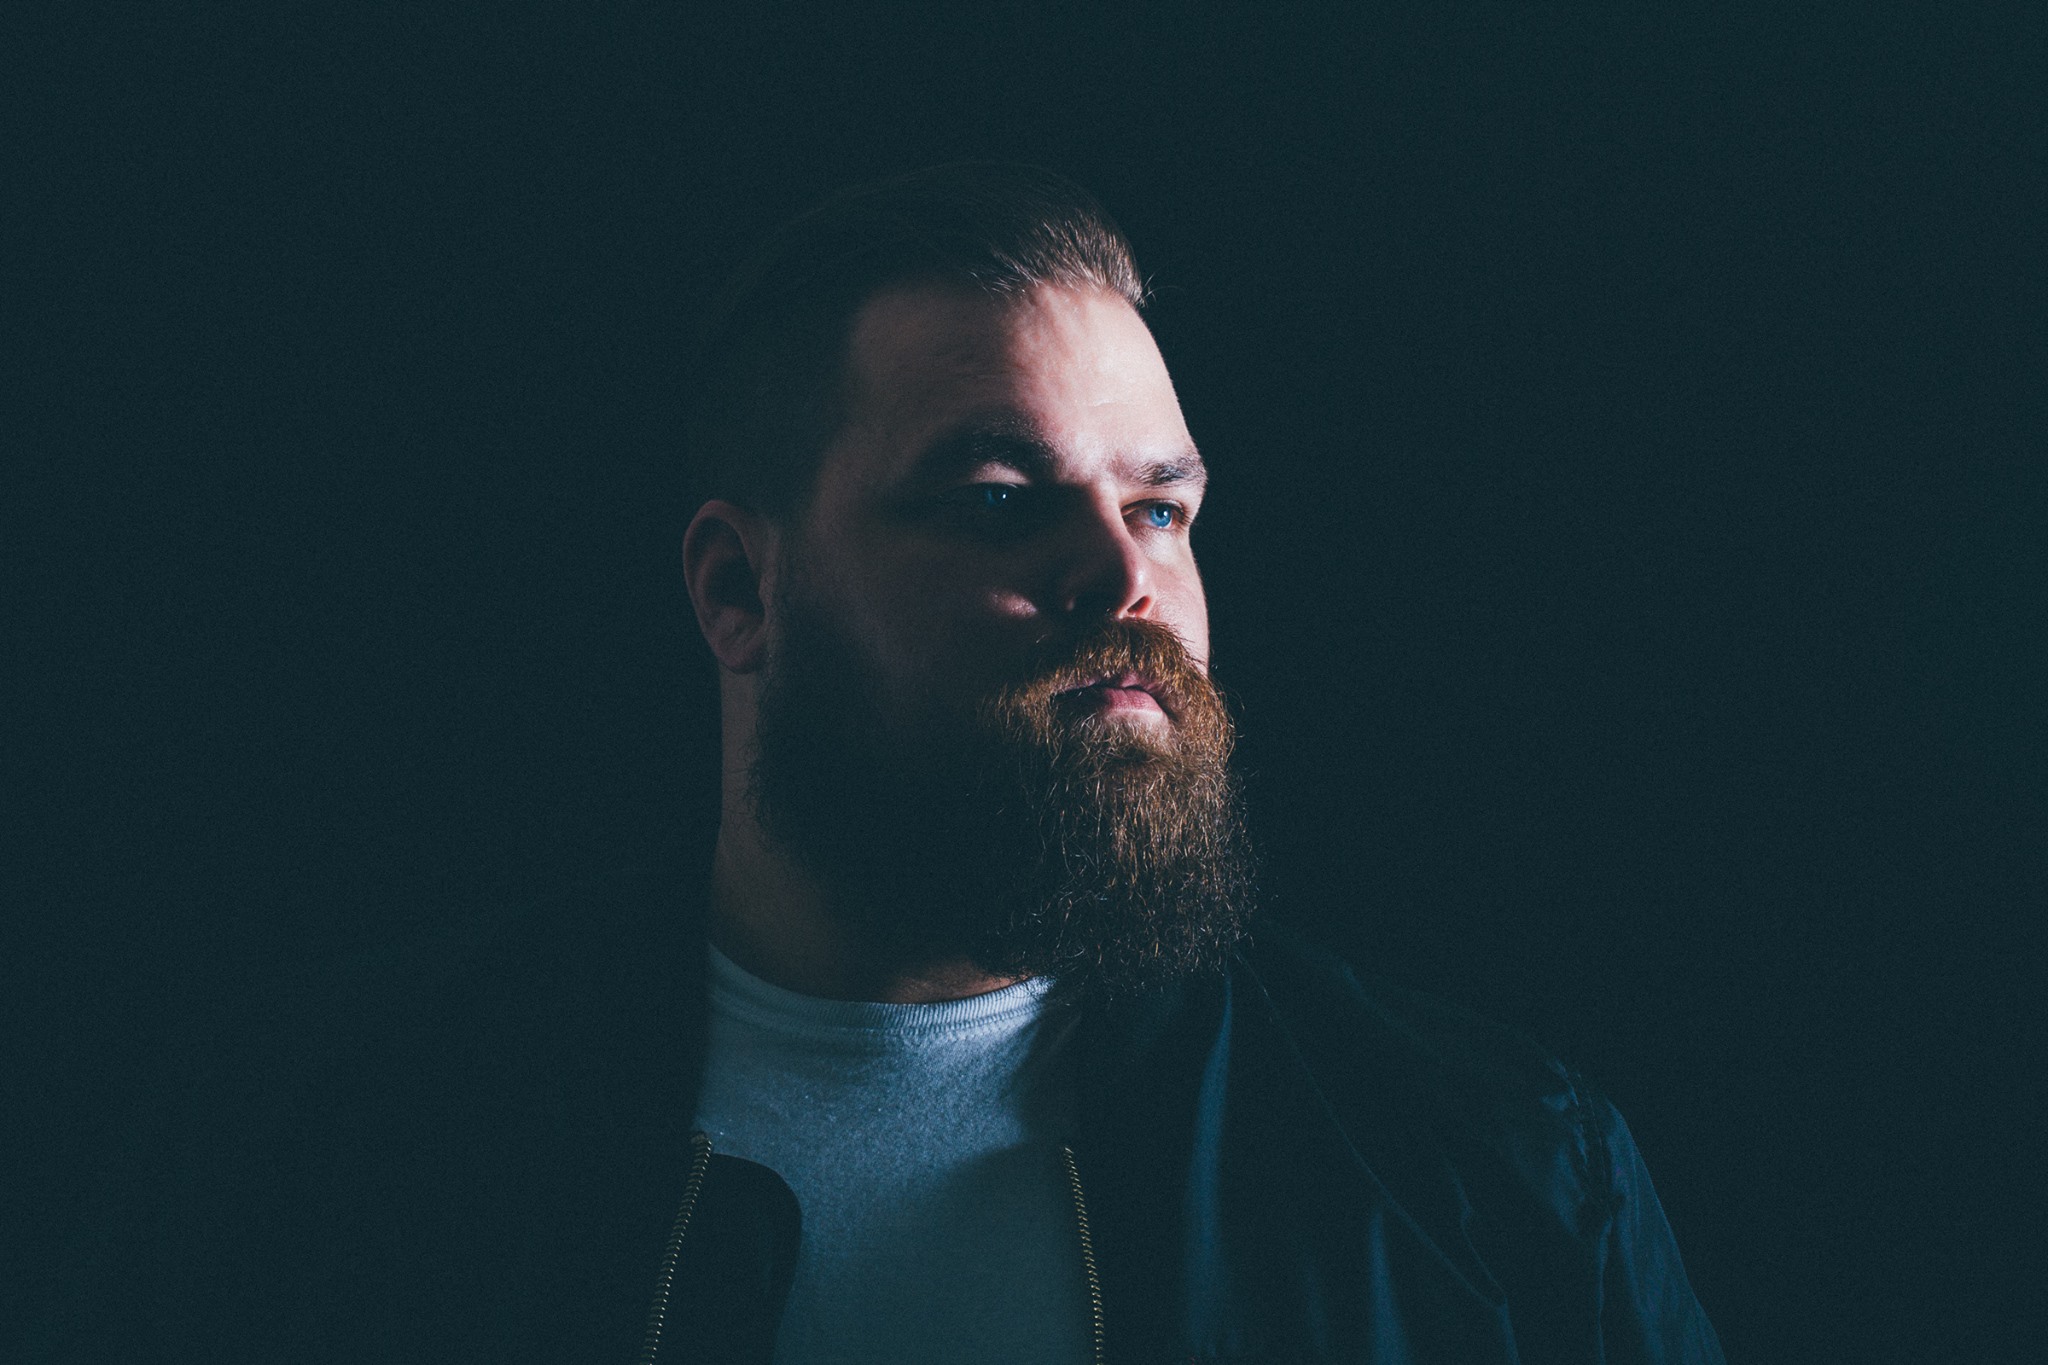 Com Truise will be performing at MO Sound Bites this 